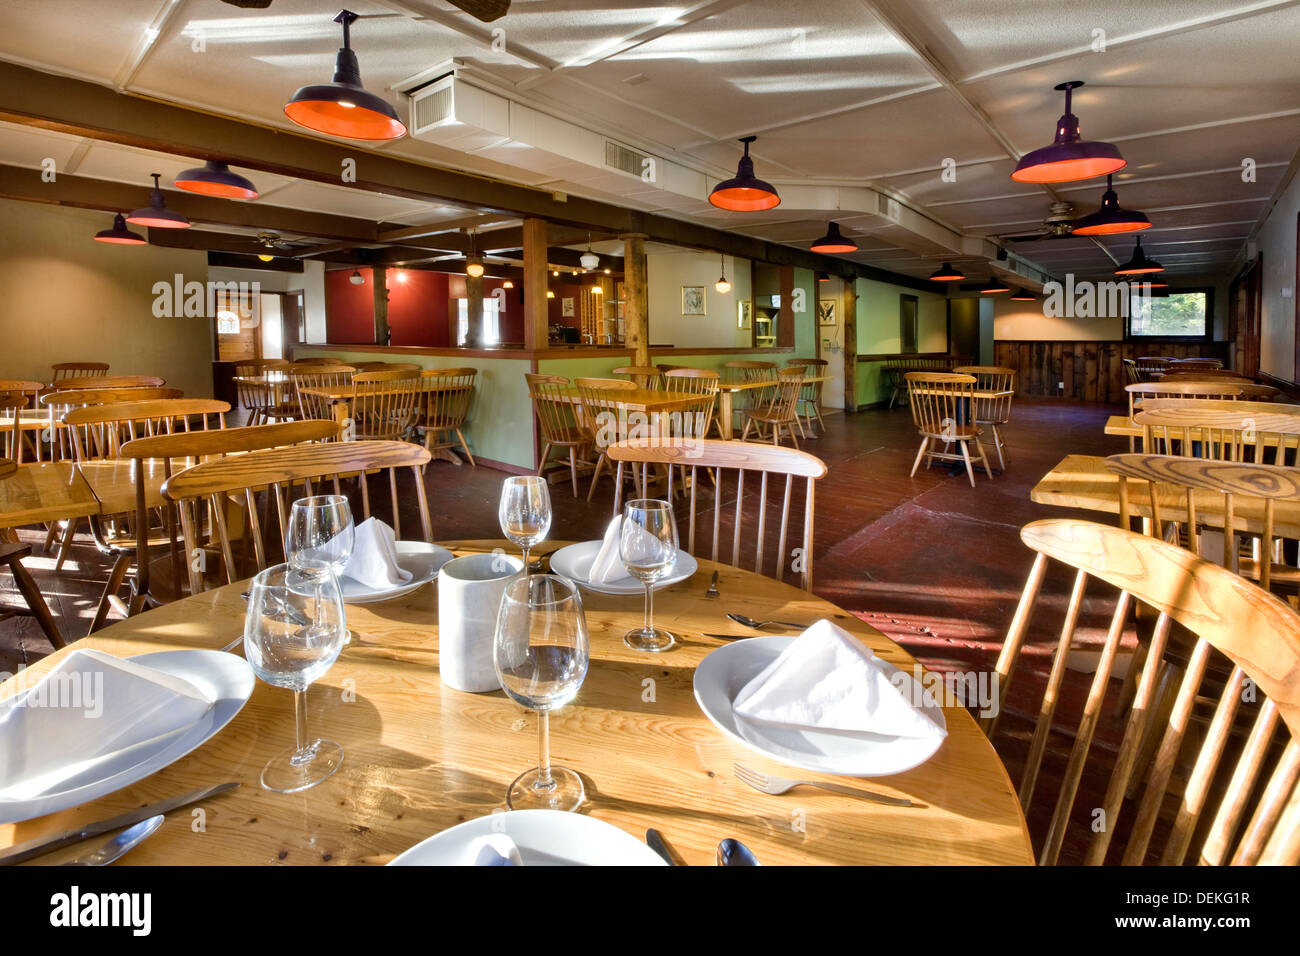 Empty tables and chairs in restaurant Stock Photo